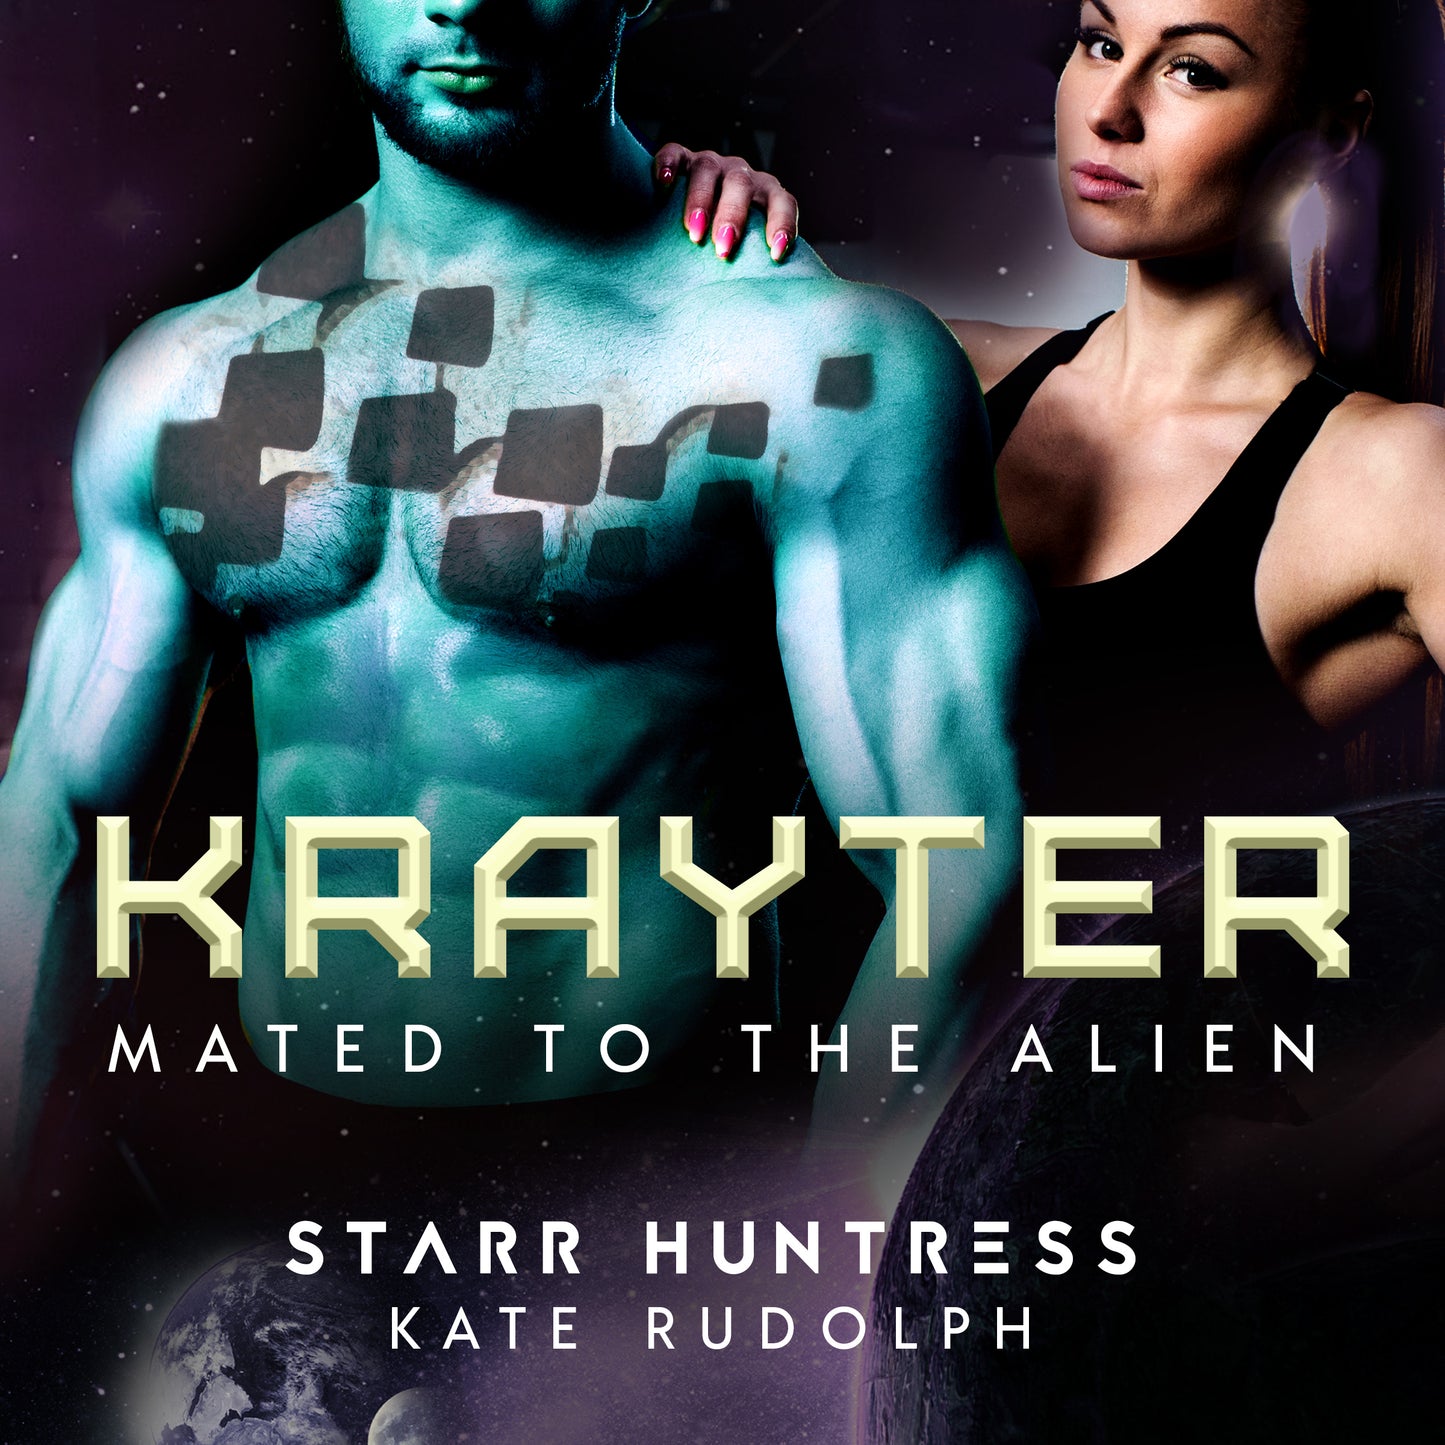 Mated to the Alien Audiobook Bundle